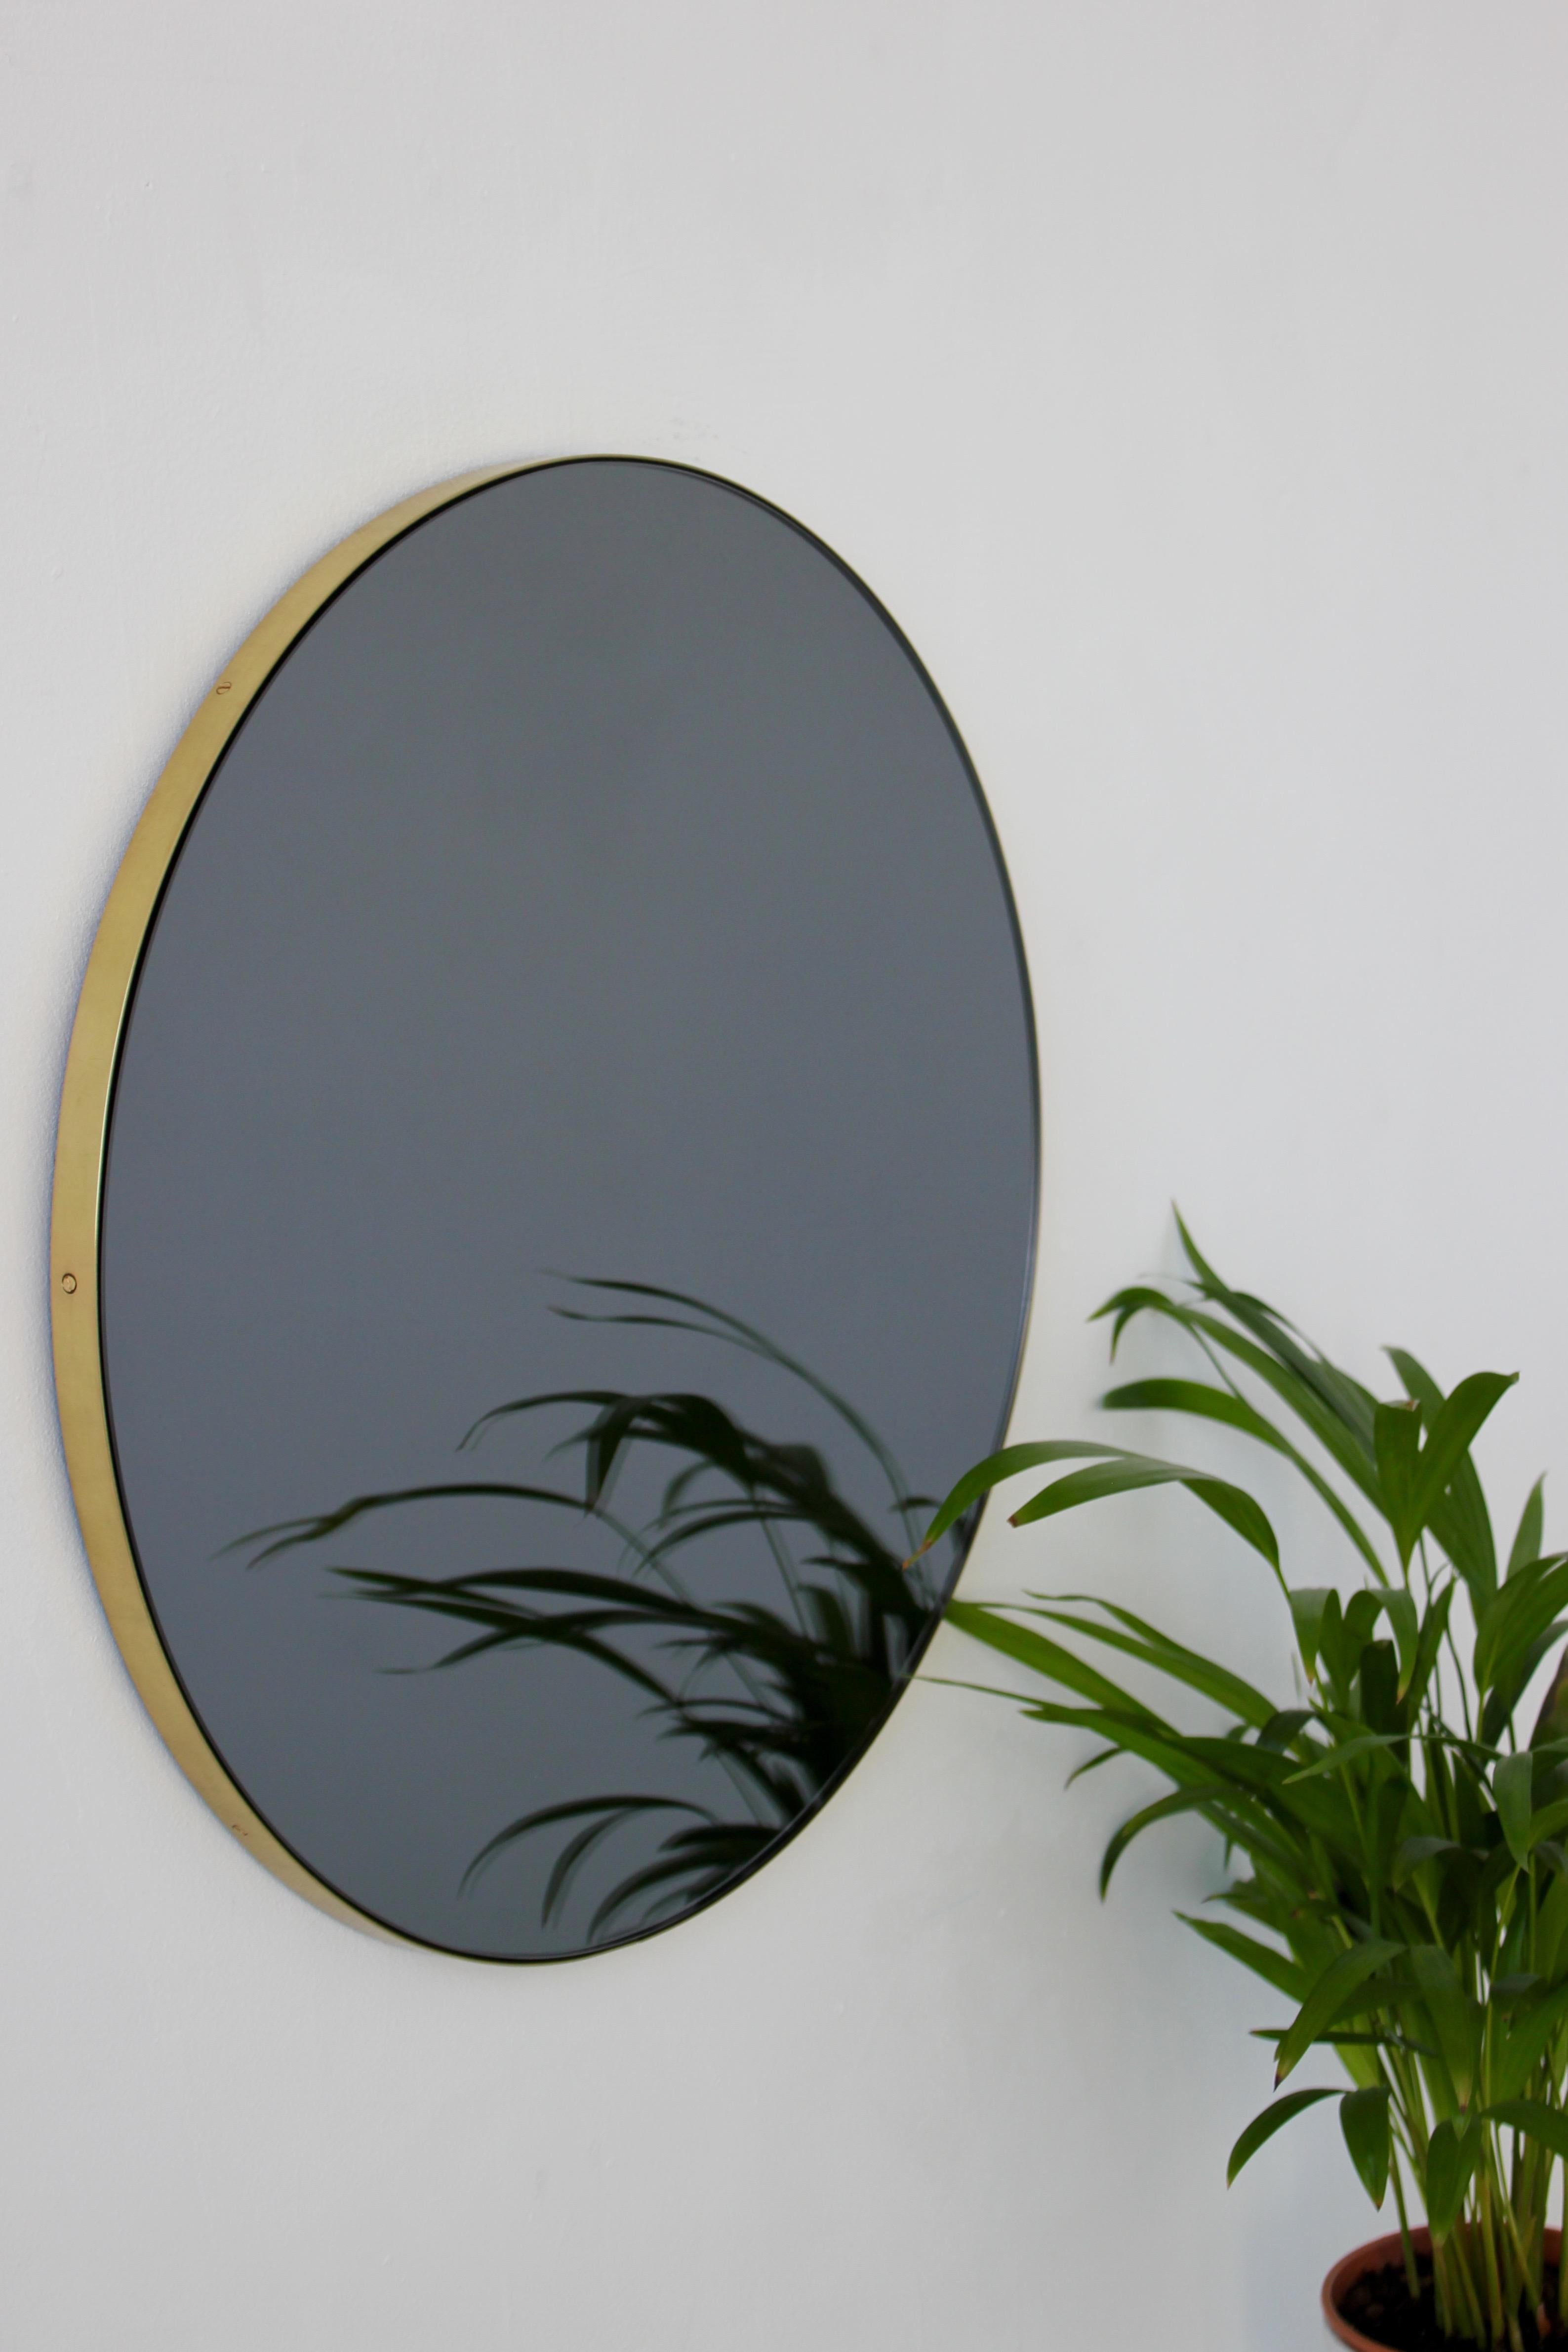 Minimalist black tinted round Orbis™ mirror with an elegant brushed brass frame. The detailing and finish, including visible brass screws, emphasize the crafty and quality feel of the mirror, a true signature of our brand.  Designed and handcrafted